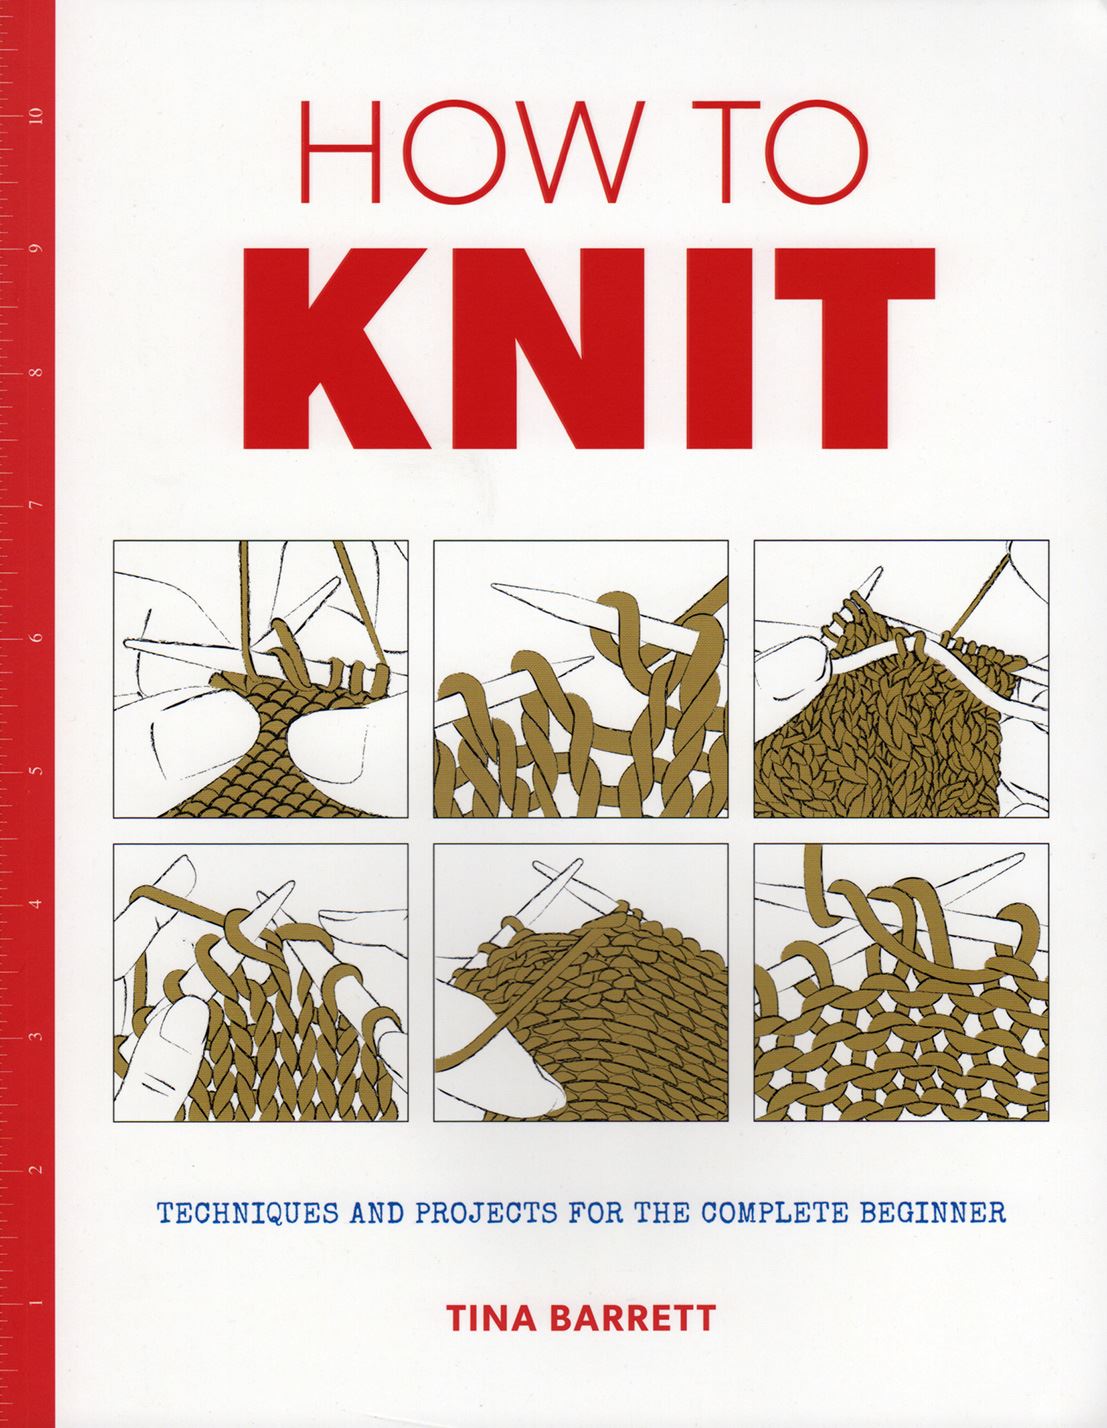 How To Knit - Pattern Book by Tina Barrett